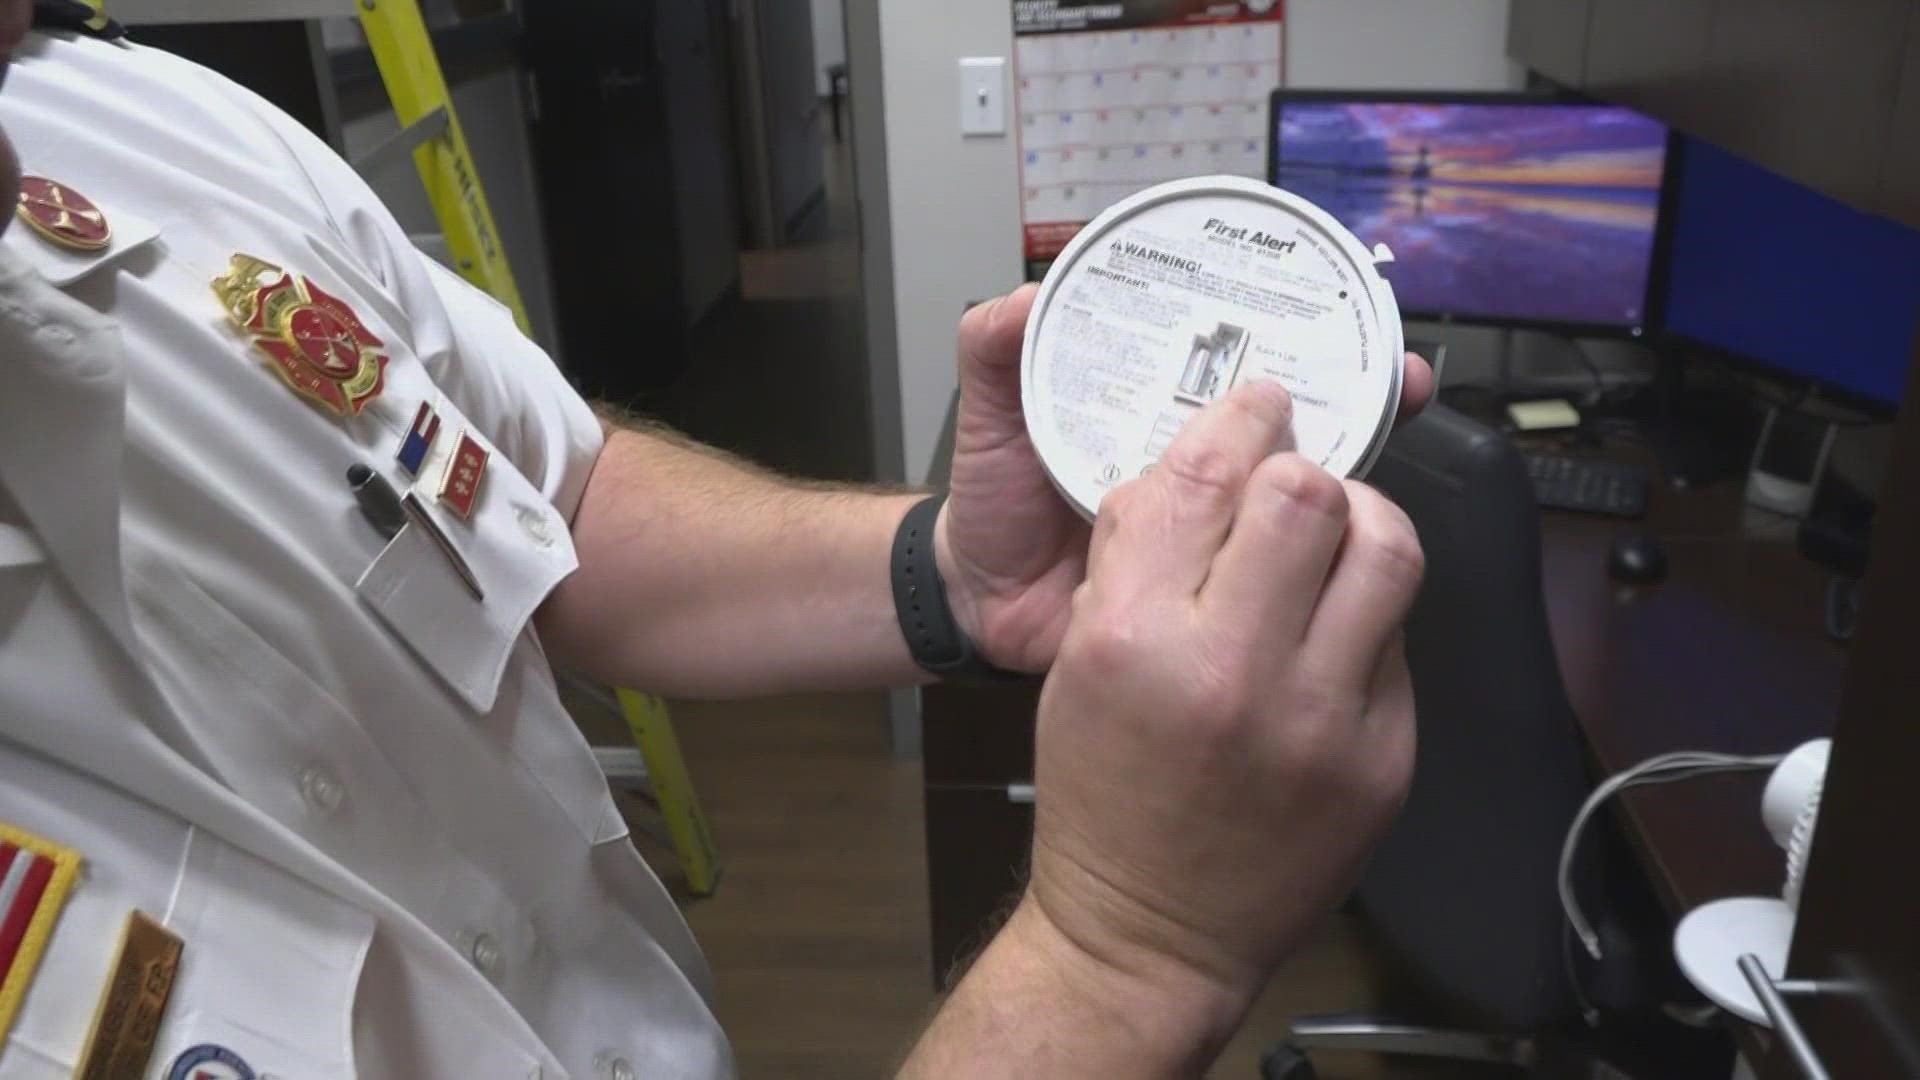 Through "Operation Save a Life," you can get a free smoke alarm installed in your home.